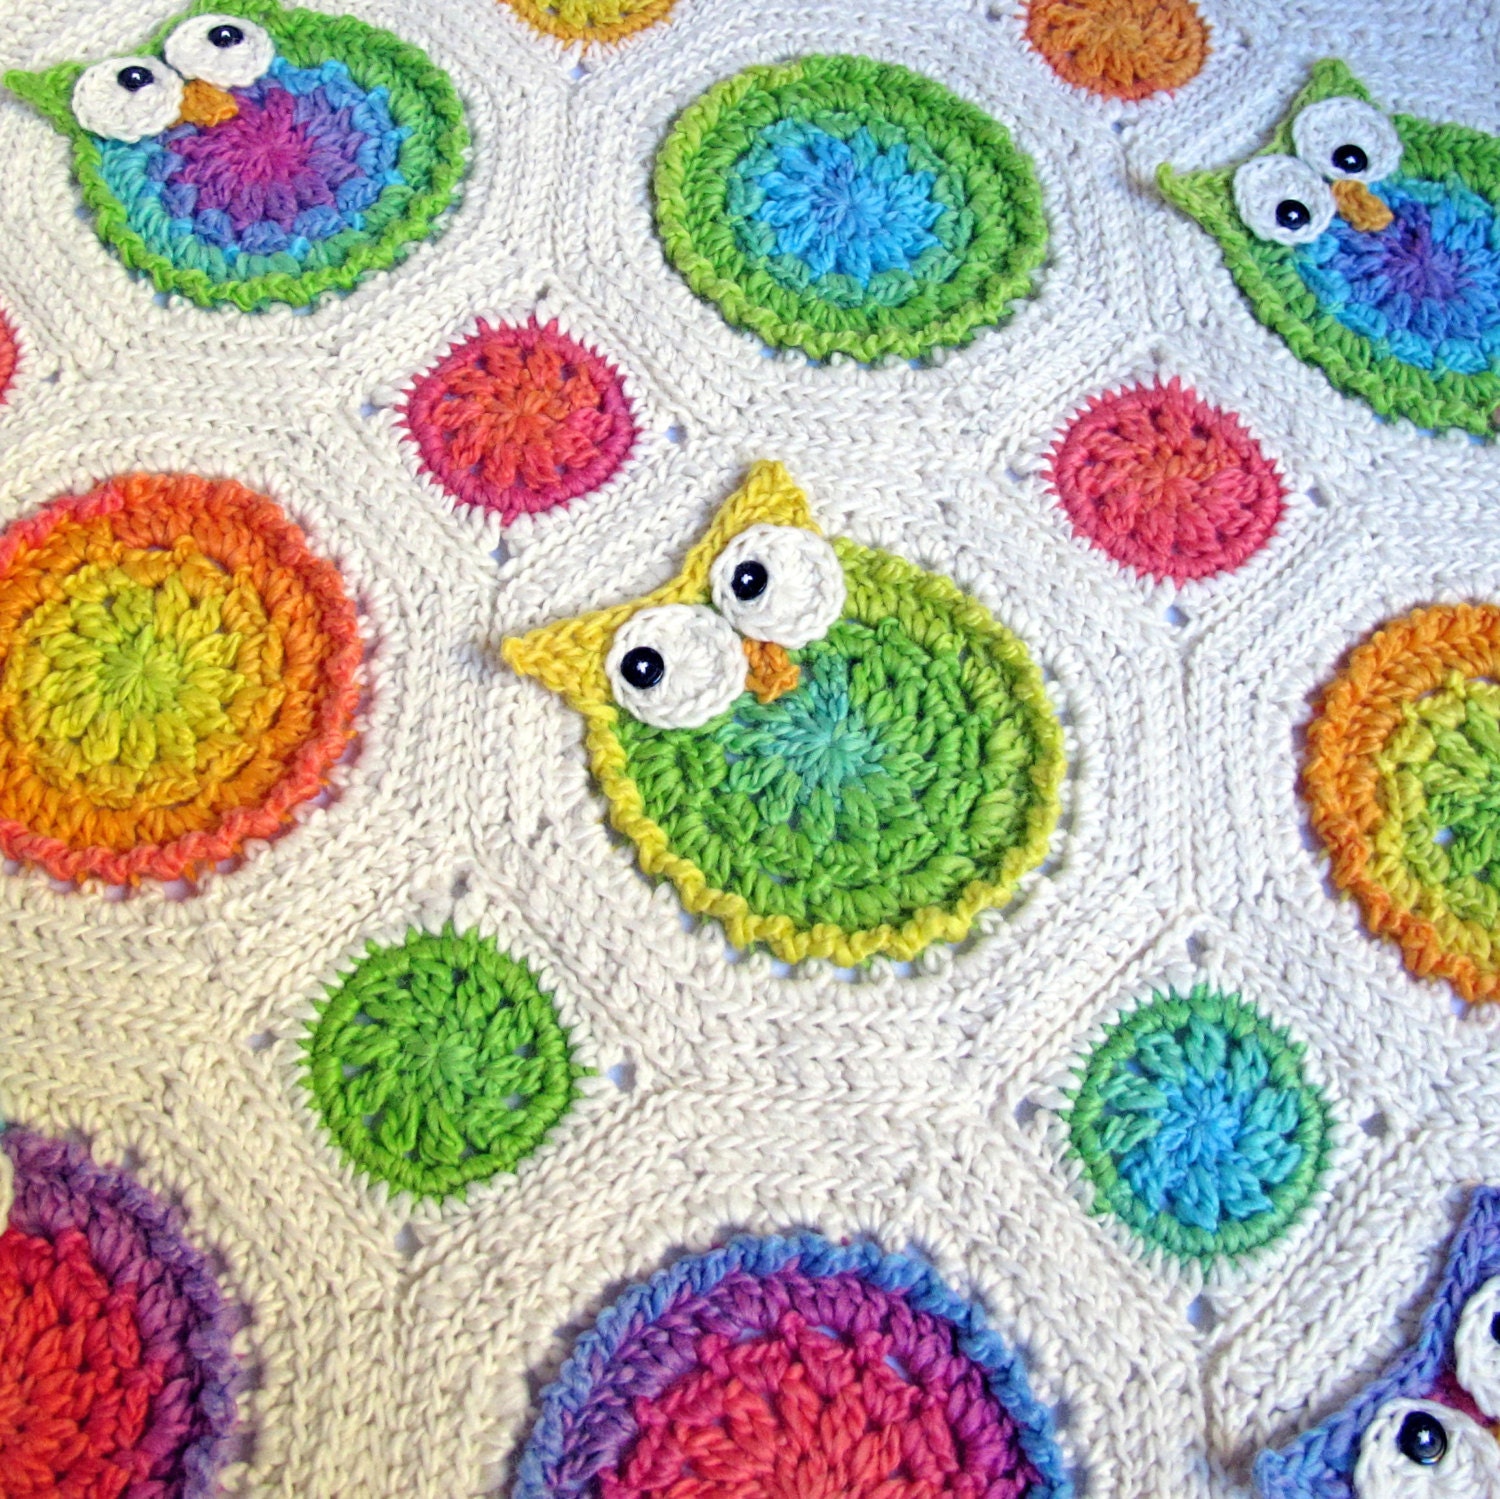 CROCHET PATTERN - Owl Obsession - a CoLorFuL owl blanket - Instant PDF Download